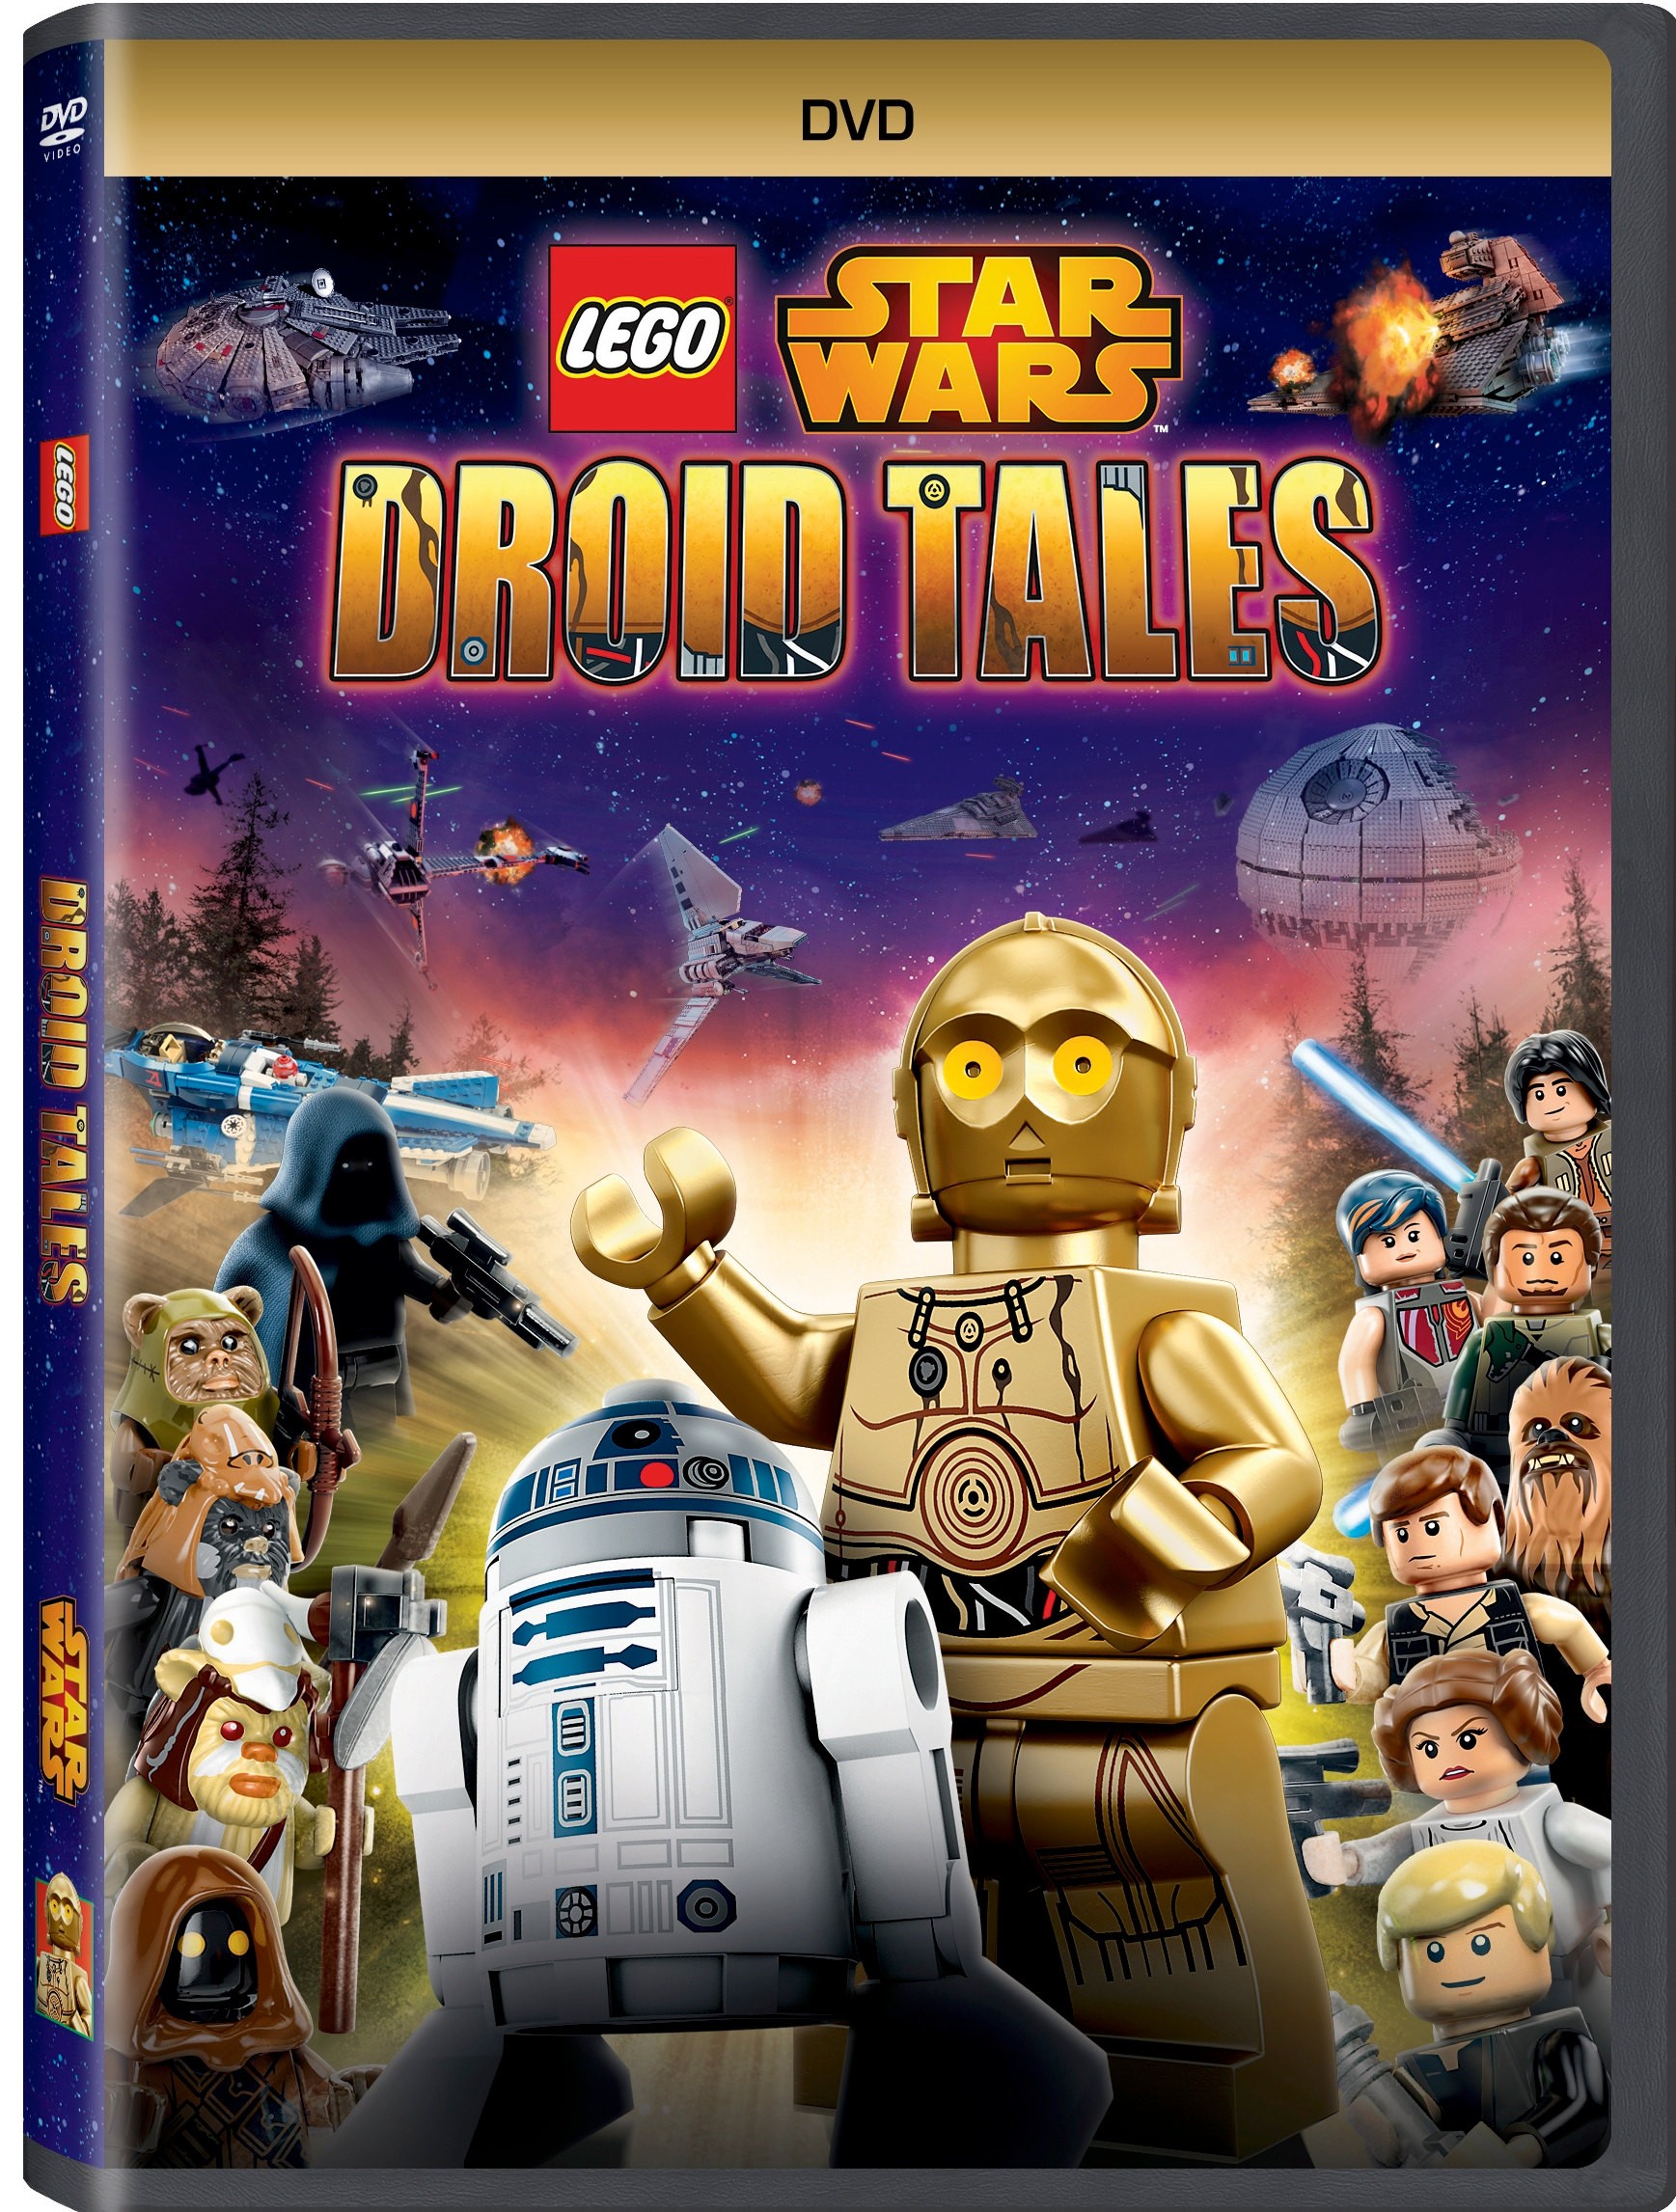 Lego Star Wars Droid Tales Promo Poster NEW C-3PO R2 D2 11 x 17 Inches Disney